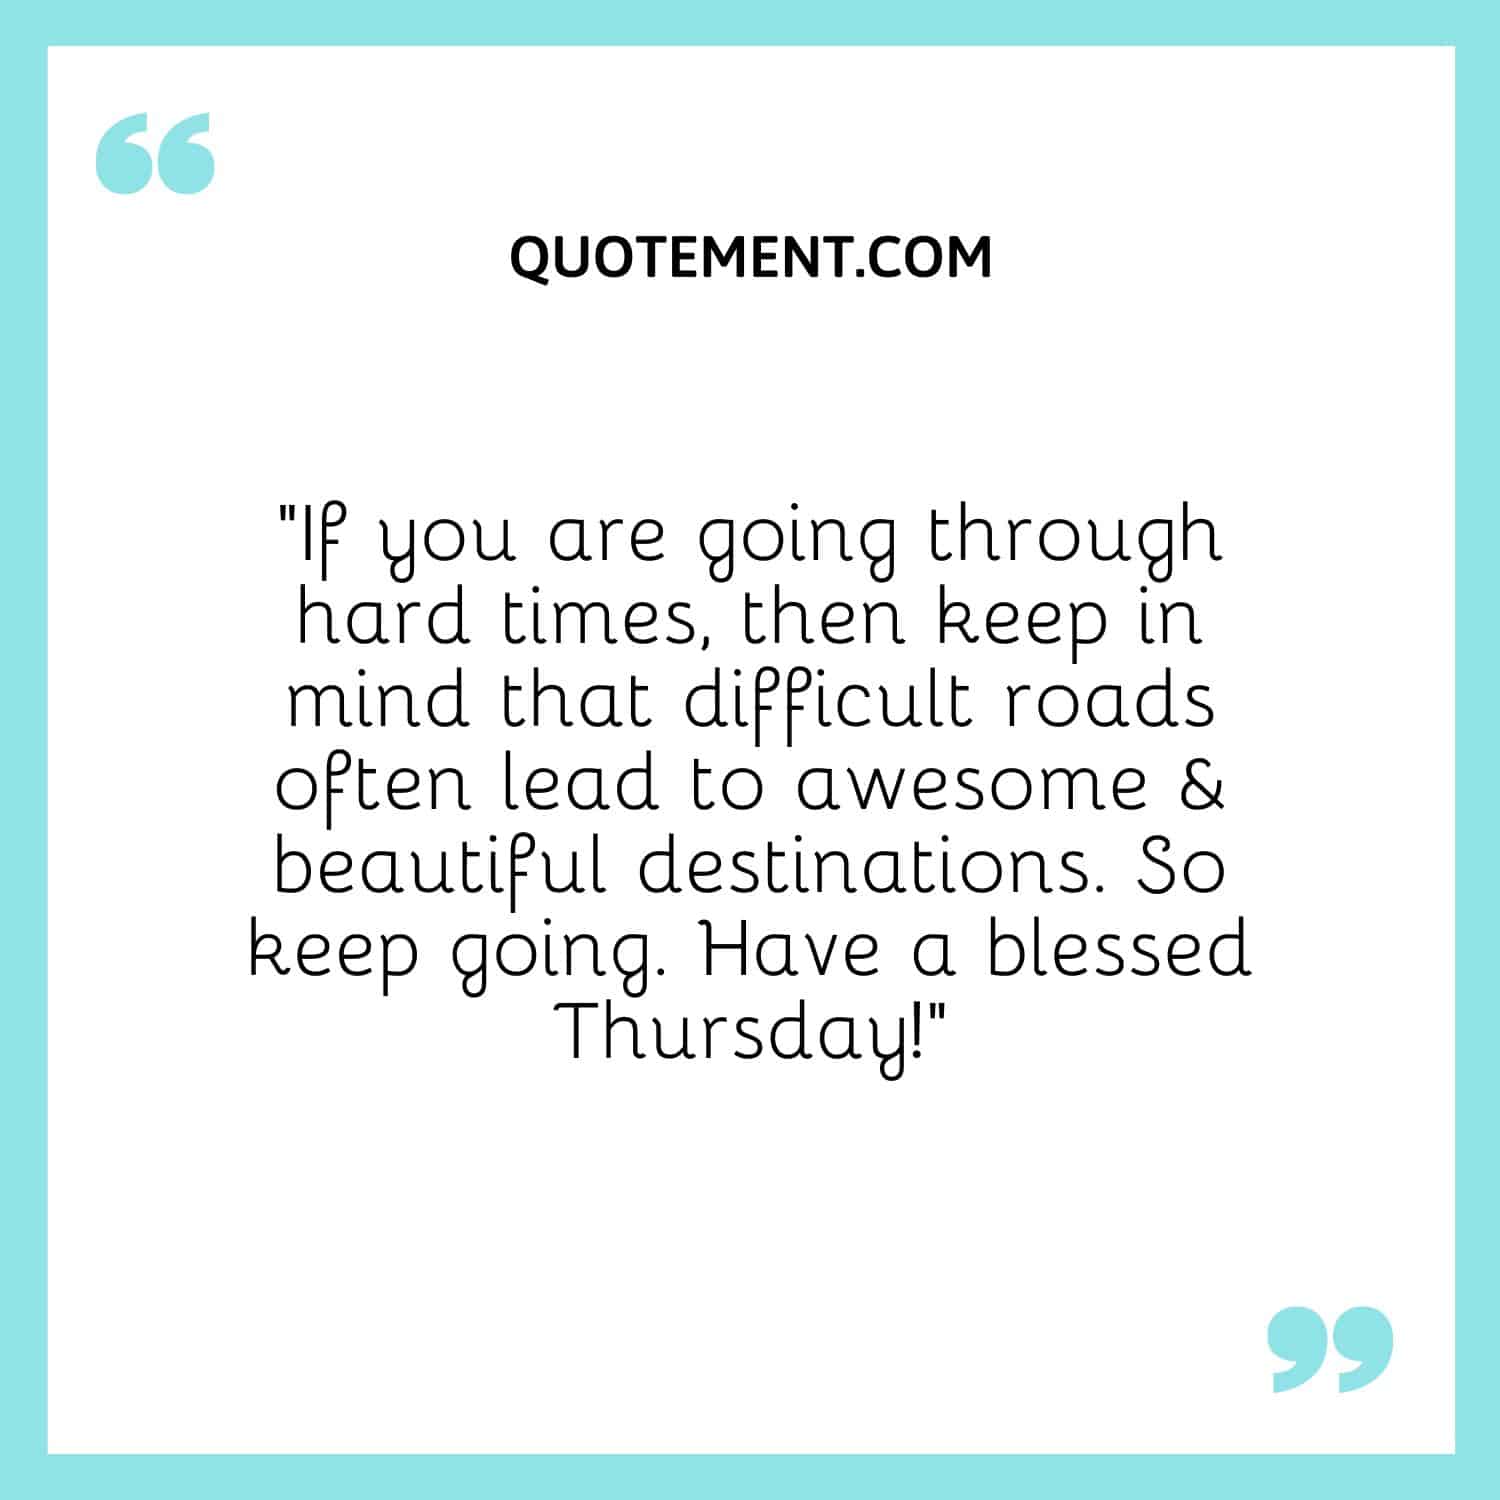 “If you are going through hard times, then keep in mind that difficult roads often lead to awesome & beautiful destinations. So keep going. Have a blessed Thursday!”